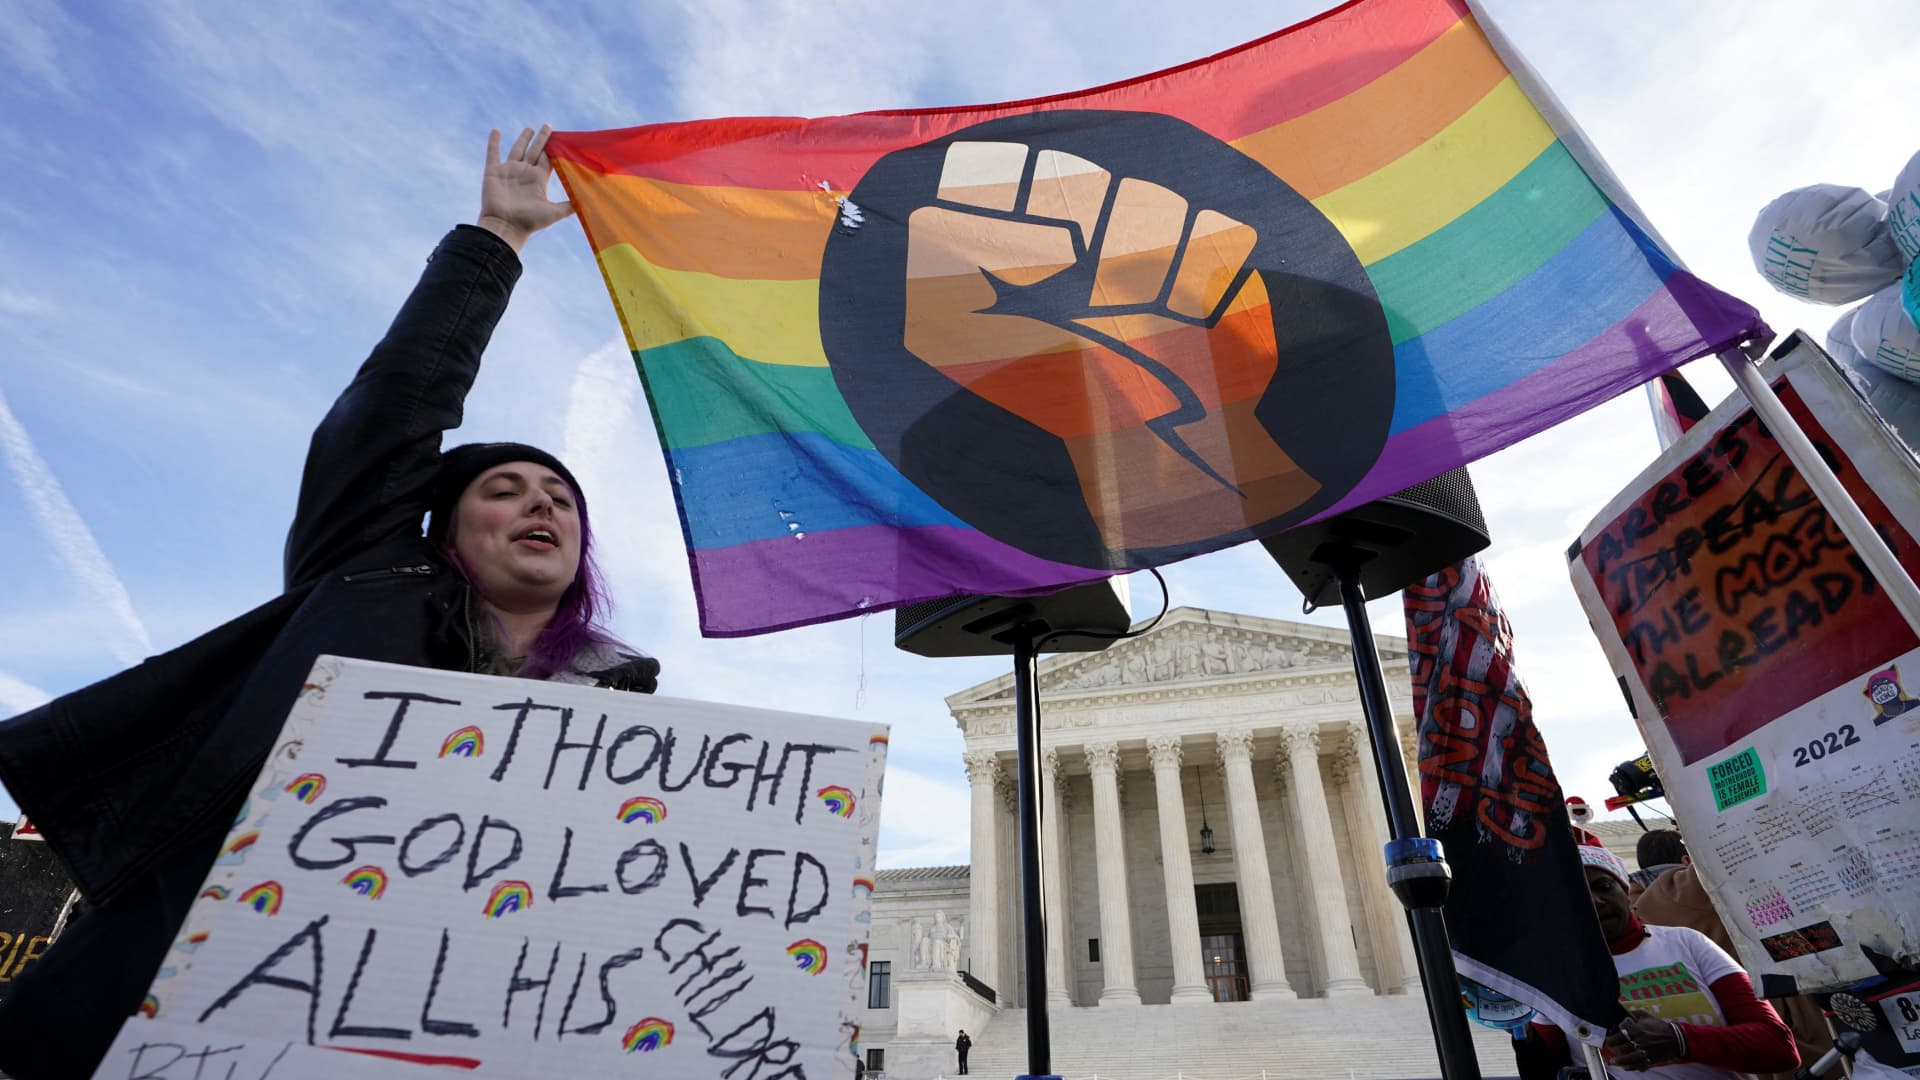 Supreme Court hears arguments from website about refusing gay marriages